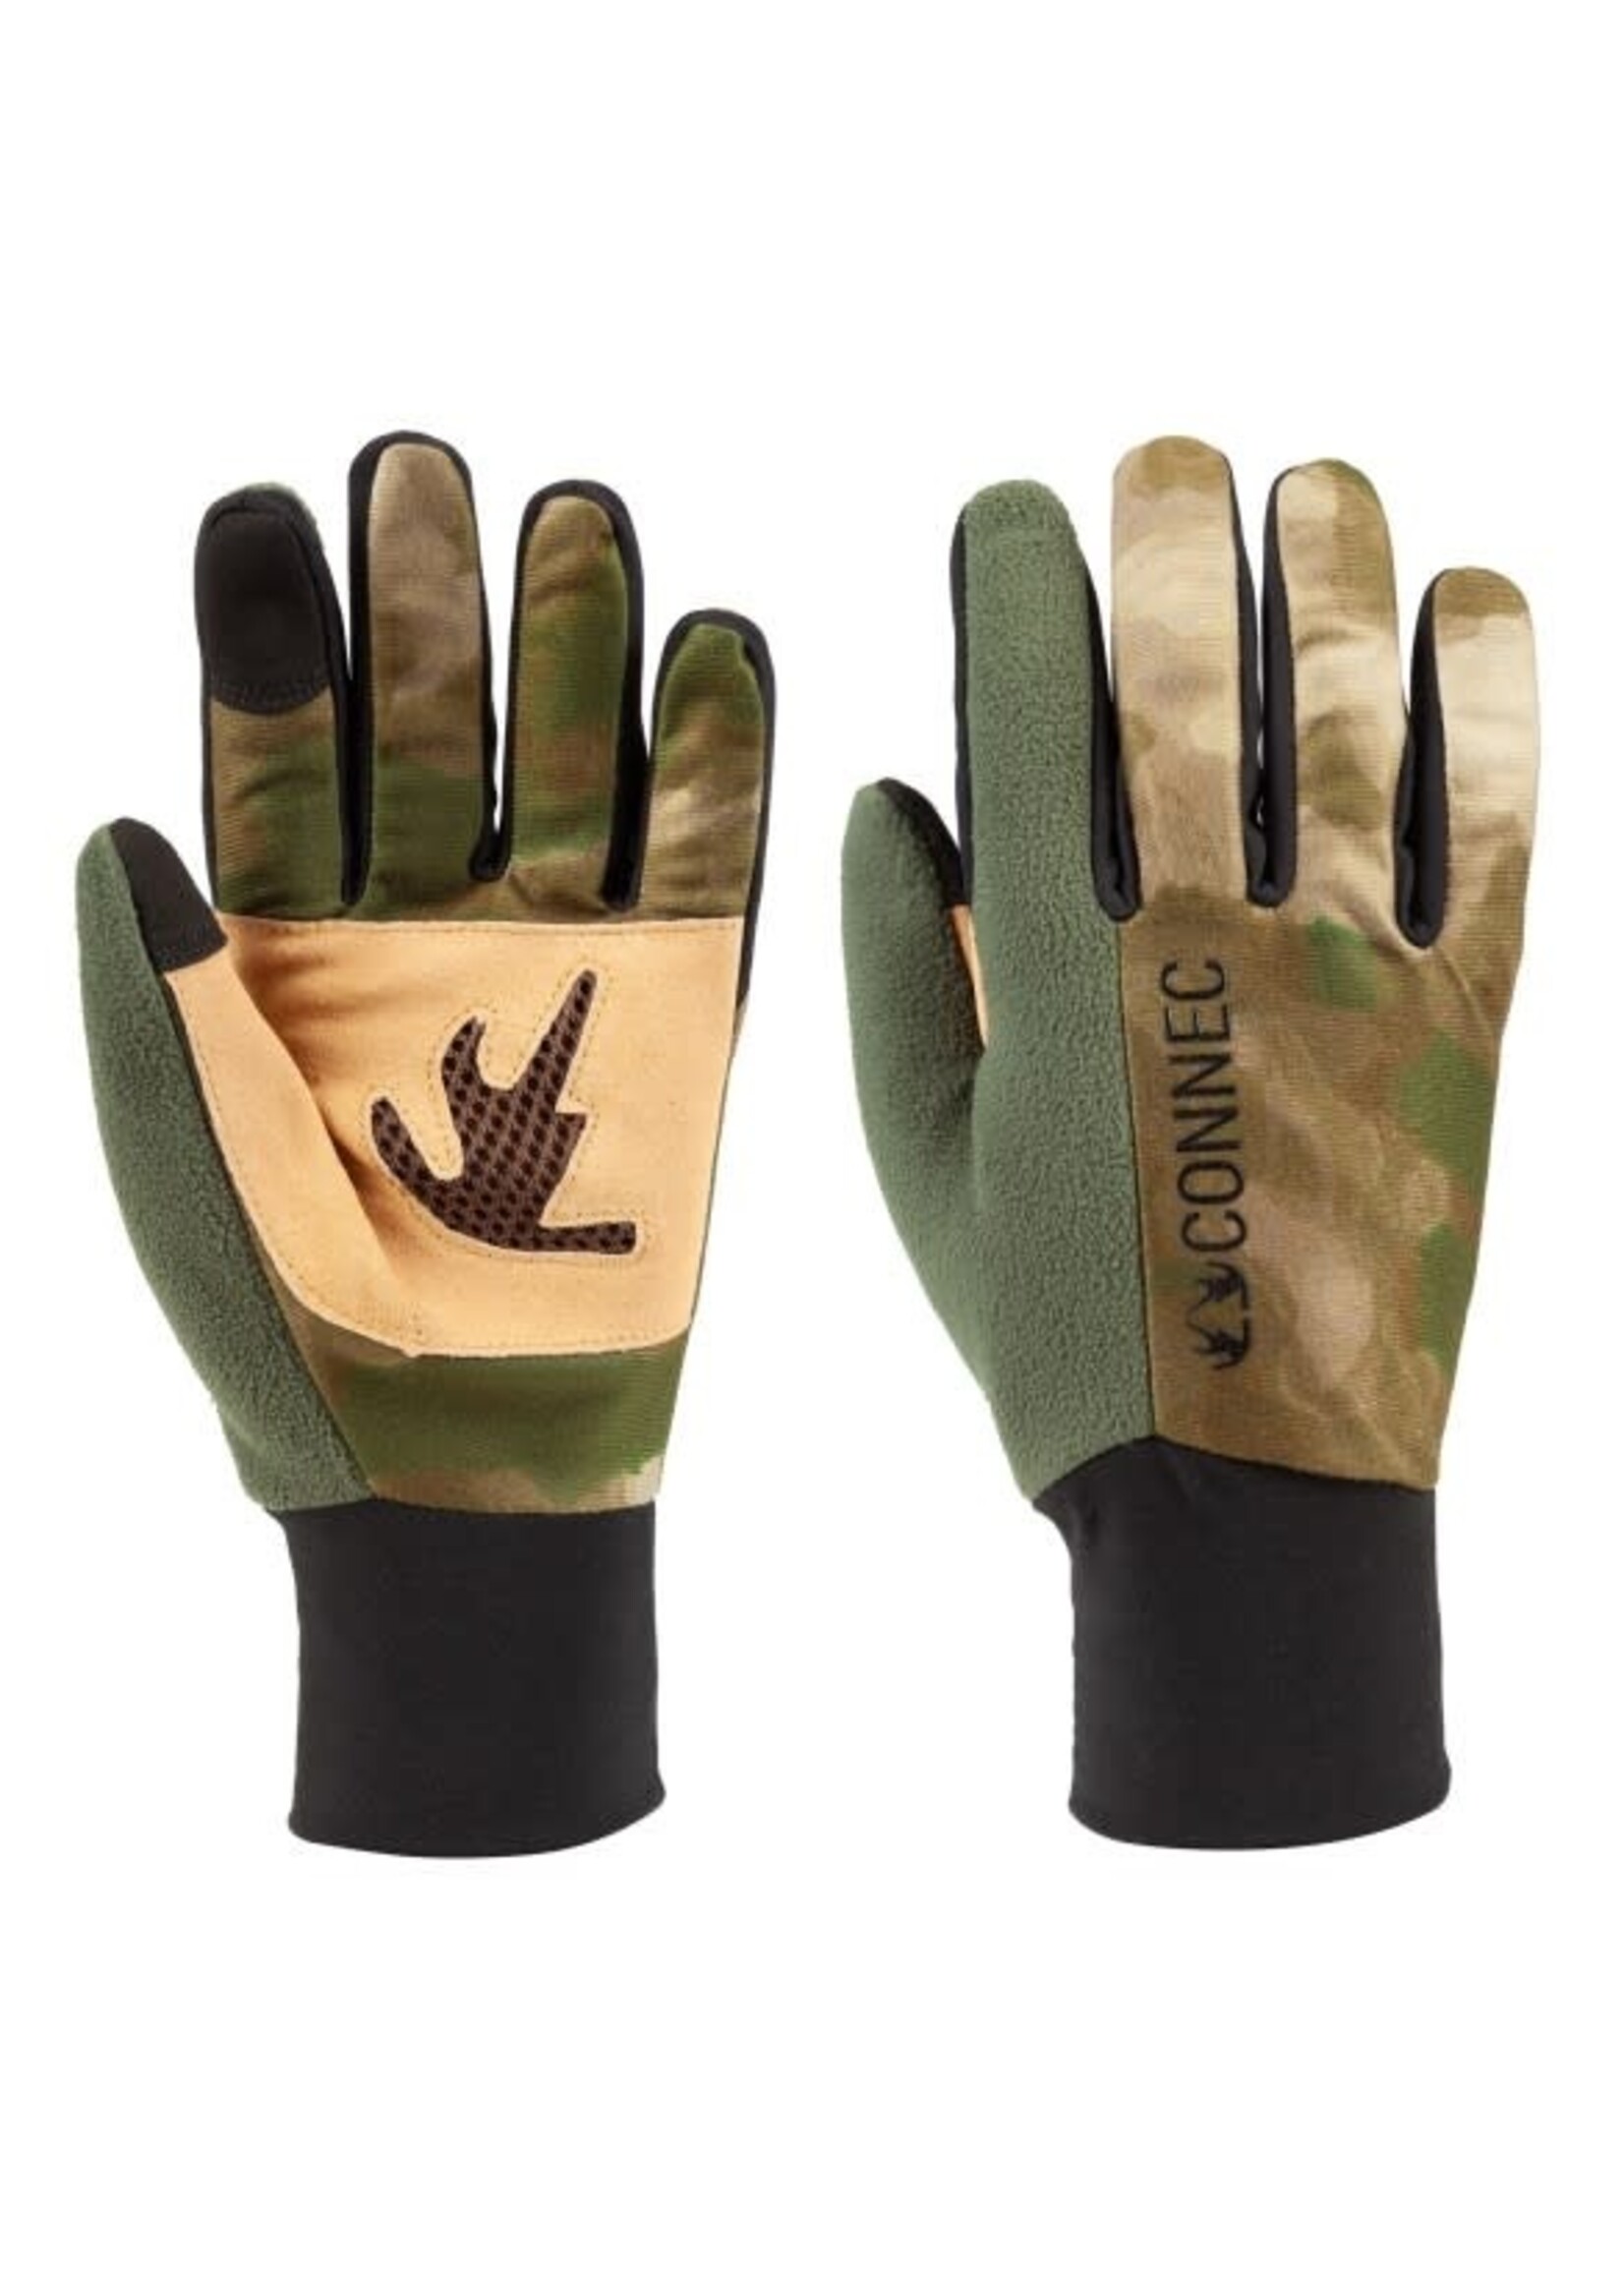 Connec Outdoor paramount gloves